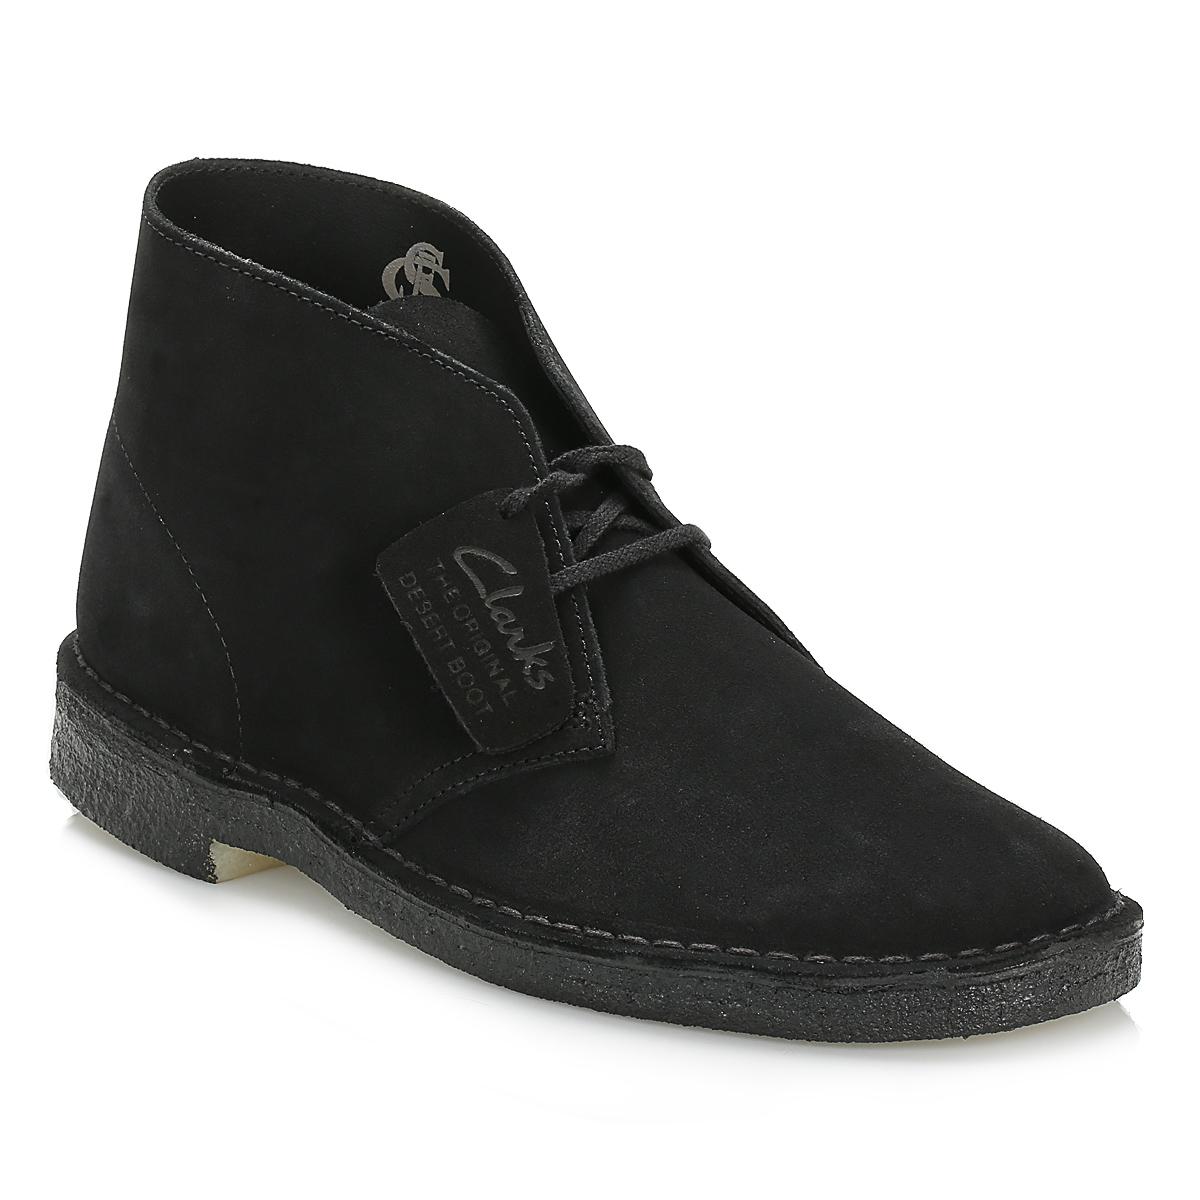 Clarks Suede Desert Boots in for - Lyst